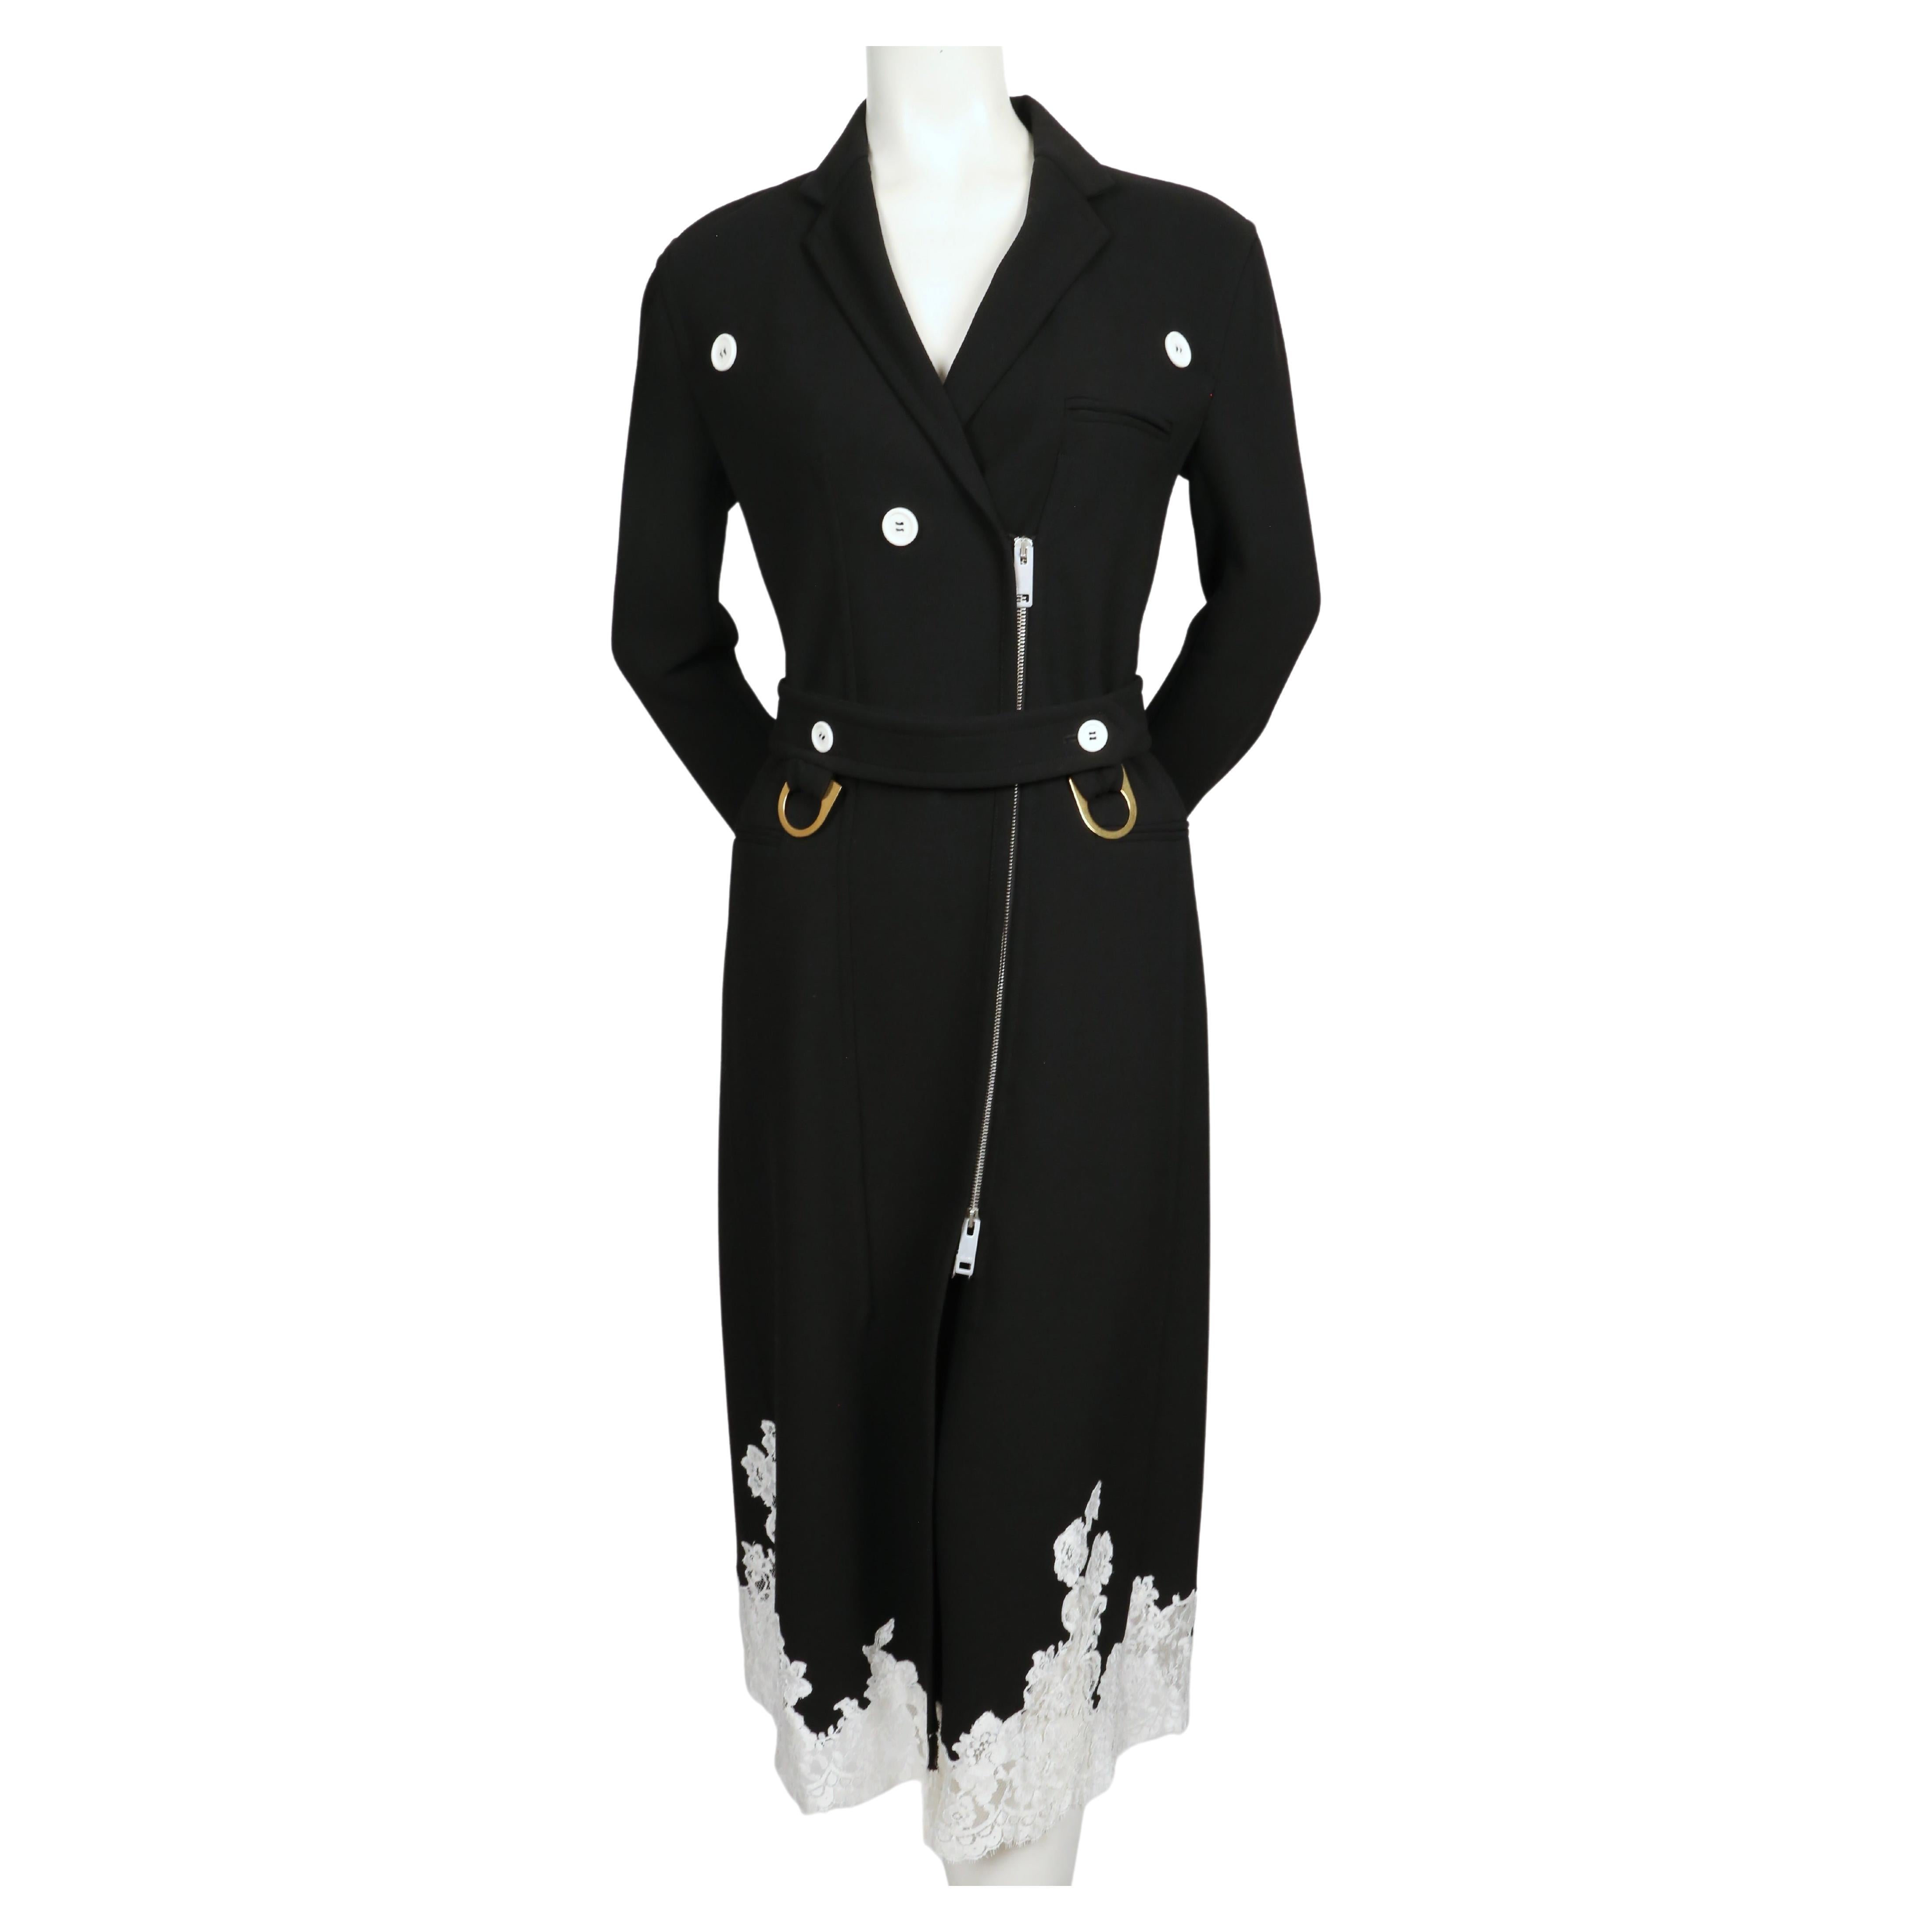 Black stretch wool trench with white lace trim designed by Phoebe Philo for Celine exactly as seen on the spring 2016 runway. French size 40. Coat was not clipped on size 2 mannequin. Approximate measurements: shoulder 17